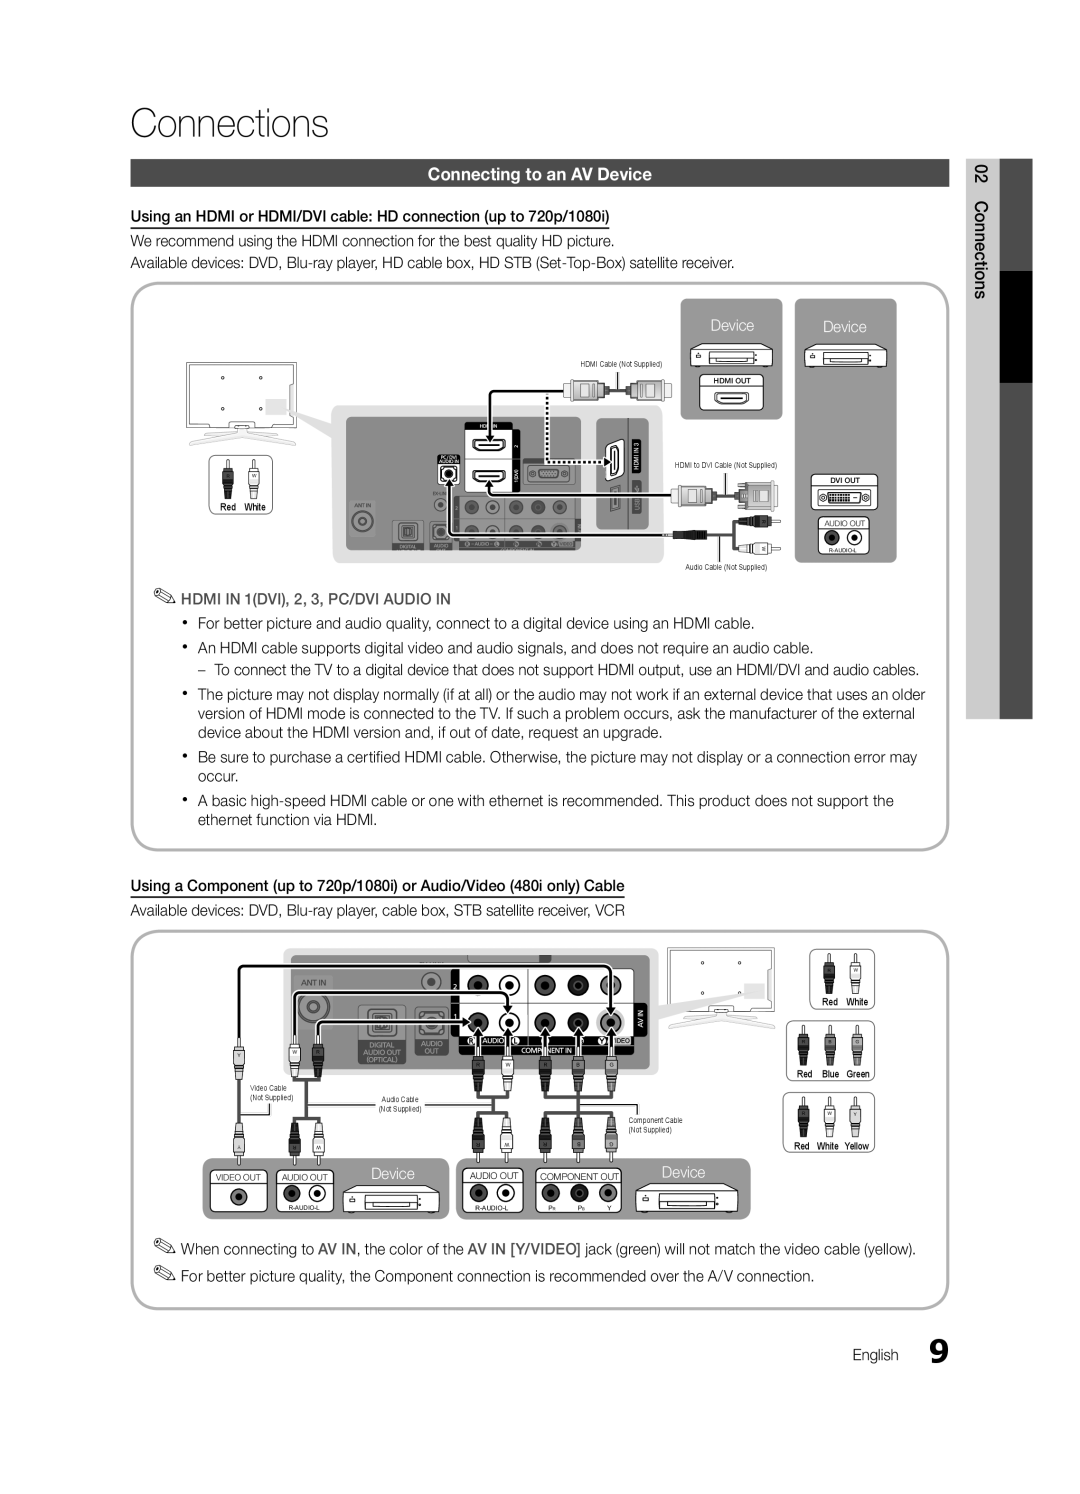 Samsung PC490-ZA, BN68-03114A-01 user manual Connections, Connecting to an AV Device, HDMI IN 1DVI, 2, 3, PC/DVI AUDIO IN 